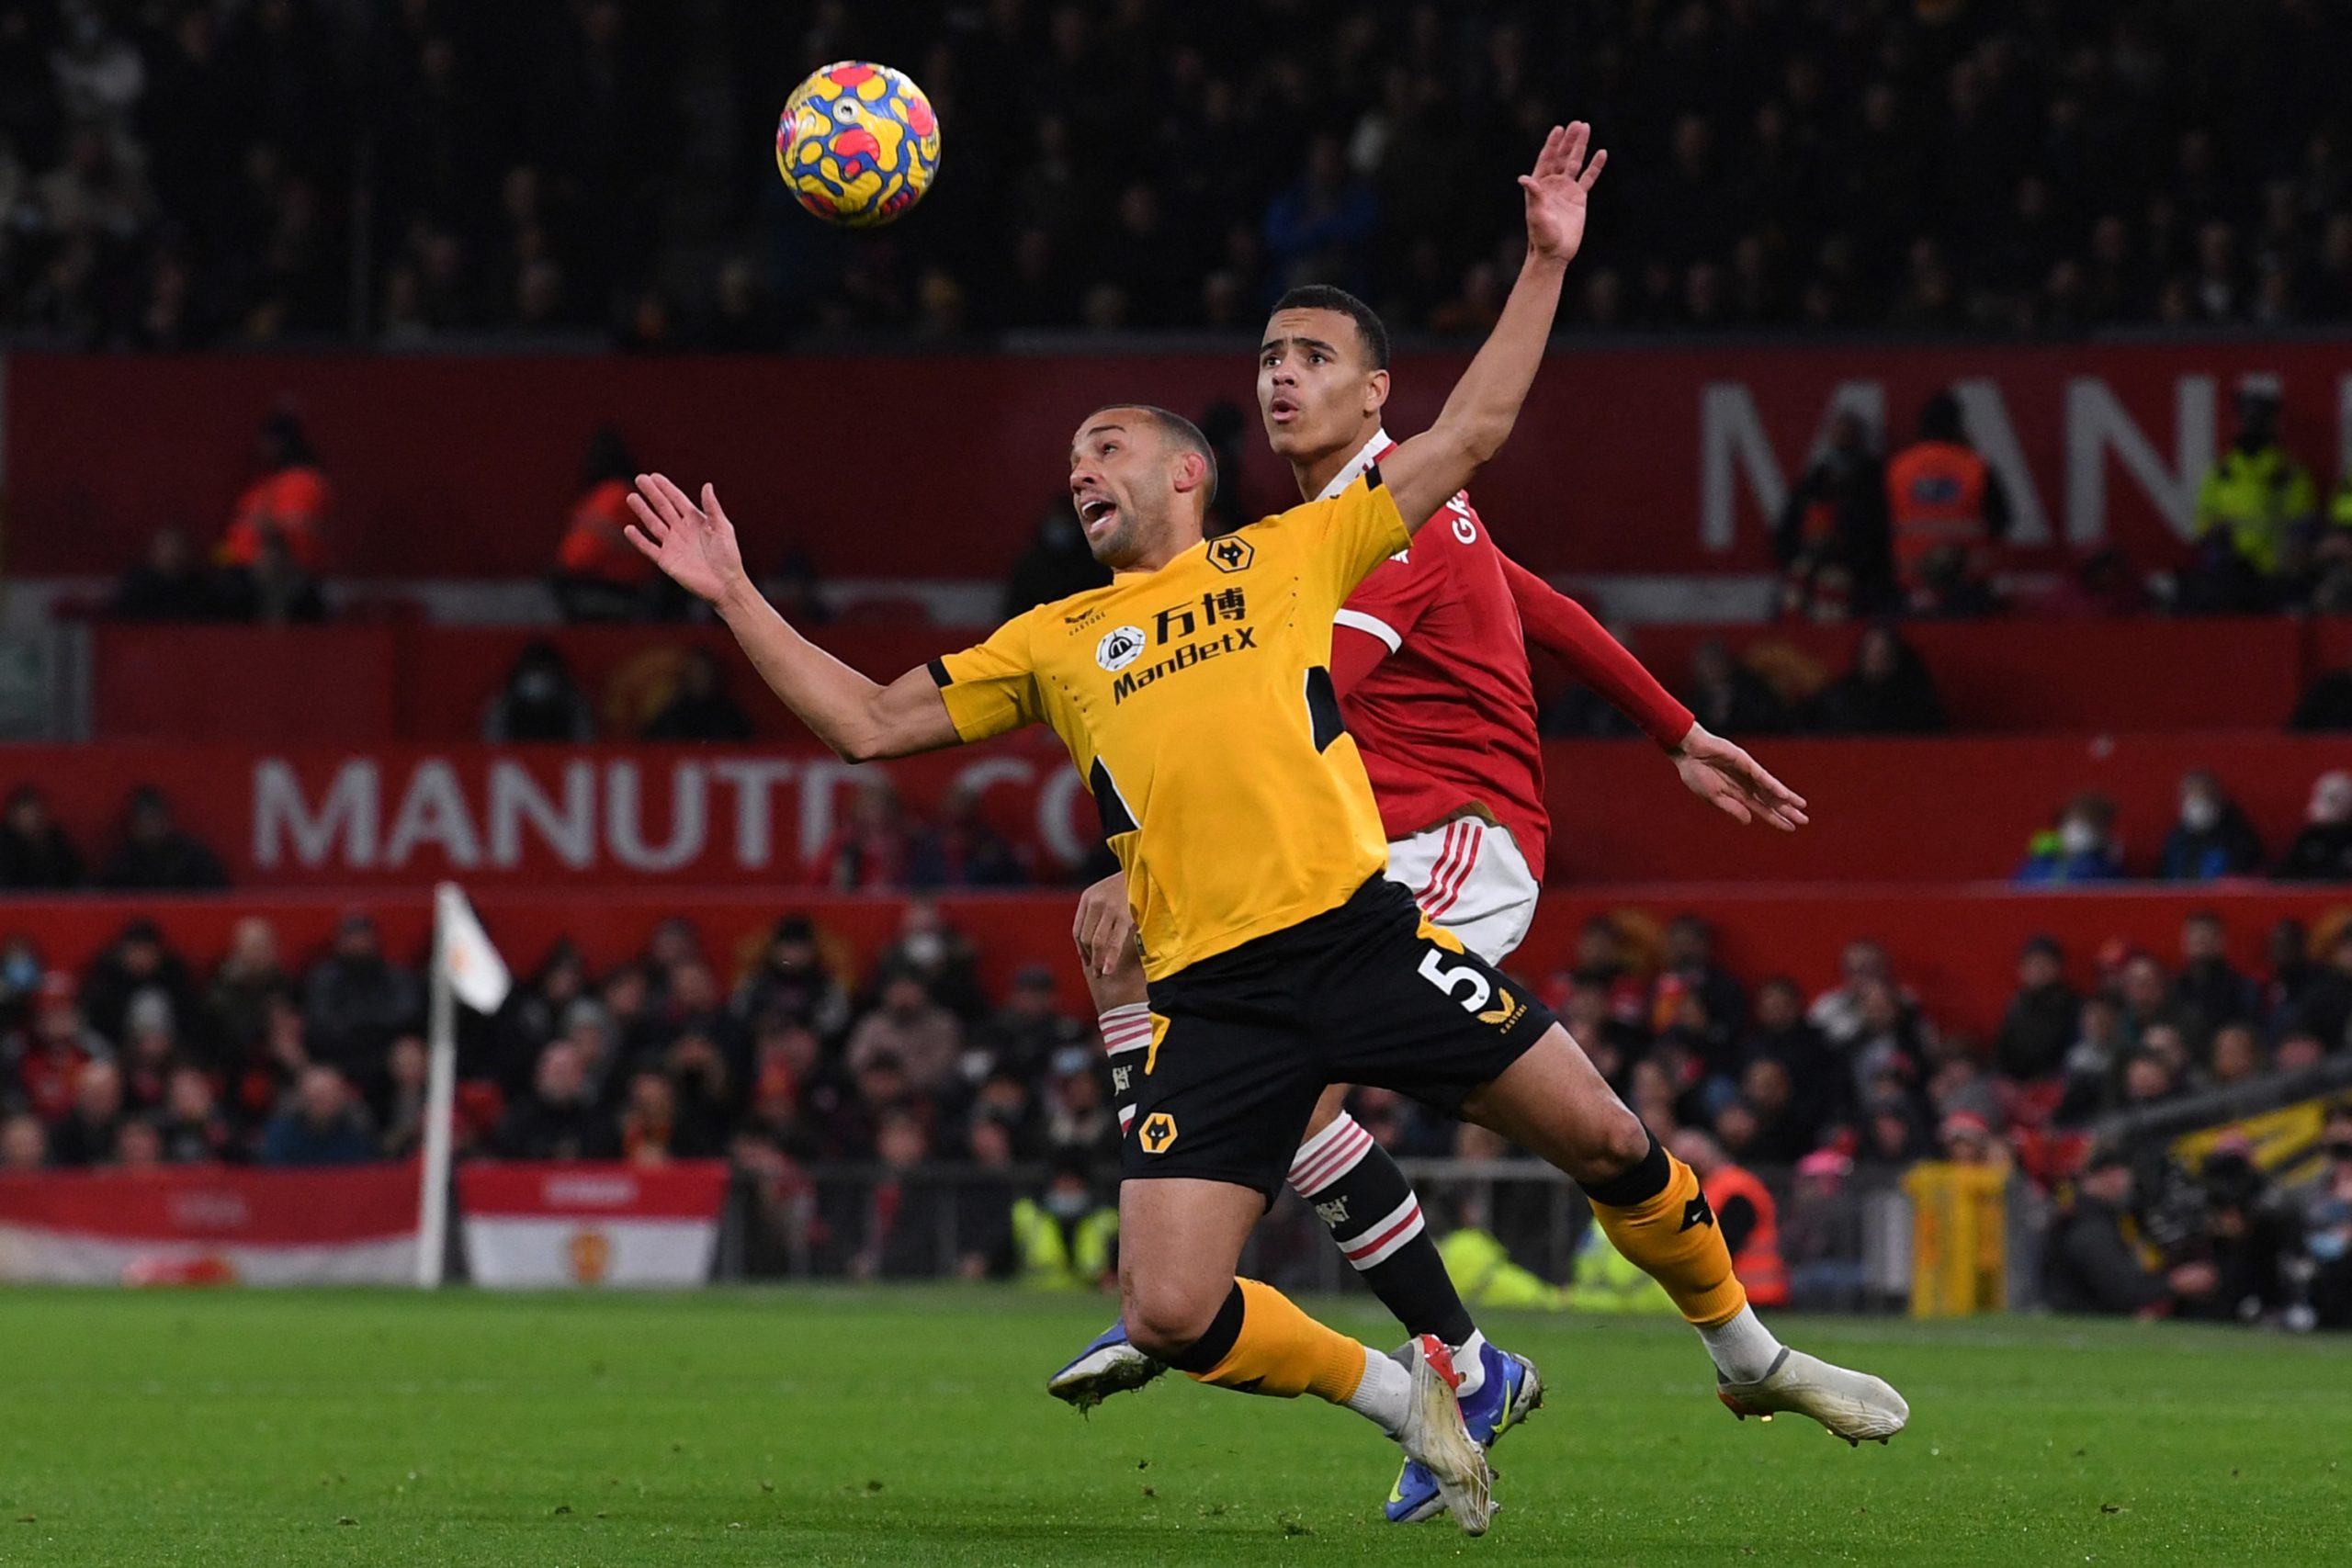 Mason Greenwood featured for Manchester United in their 1-0 defeat against Wolves.